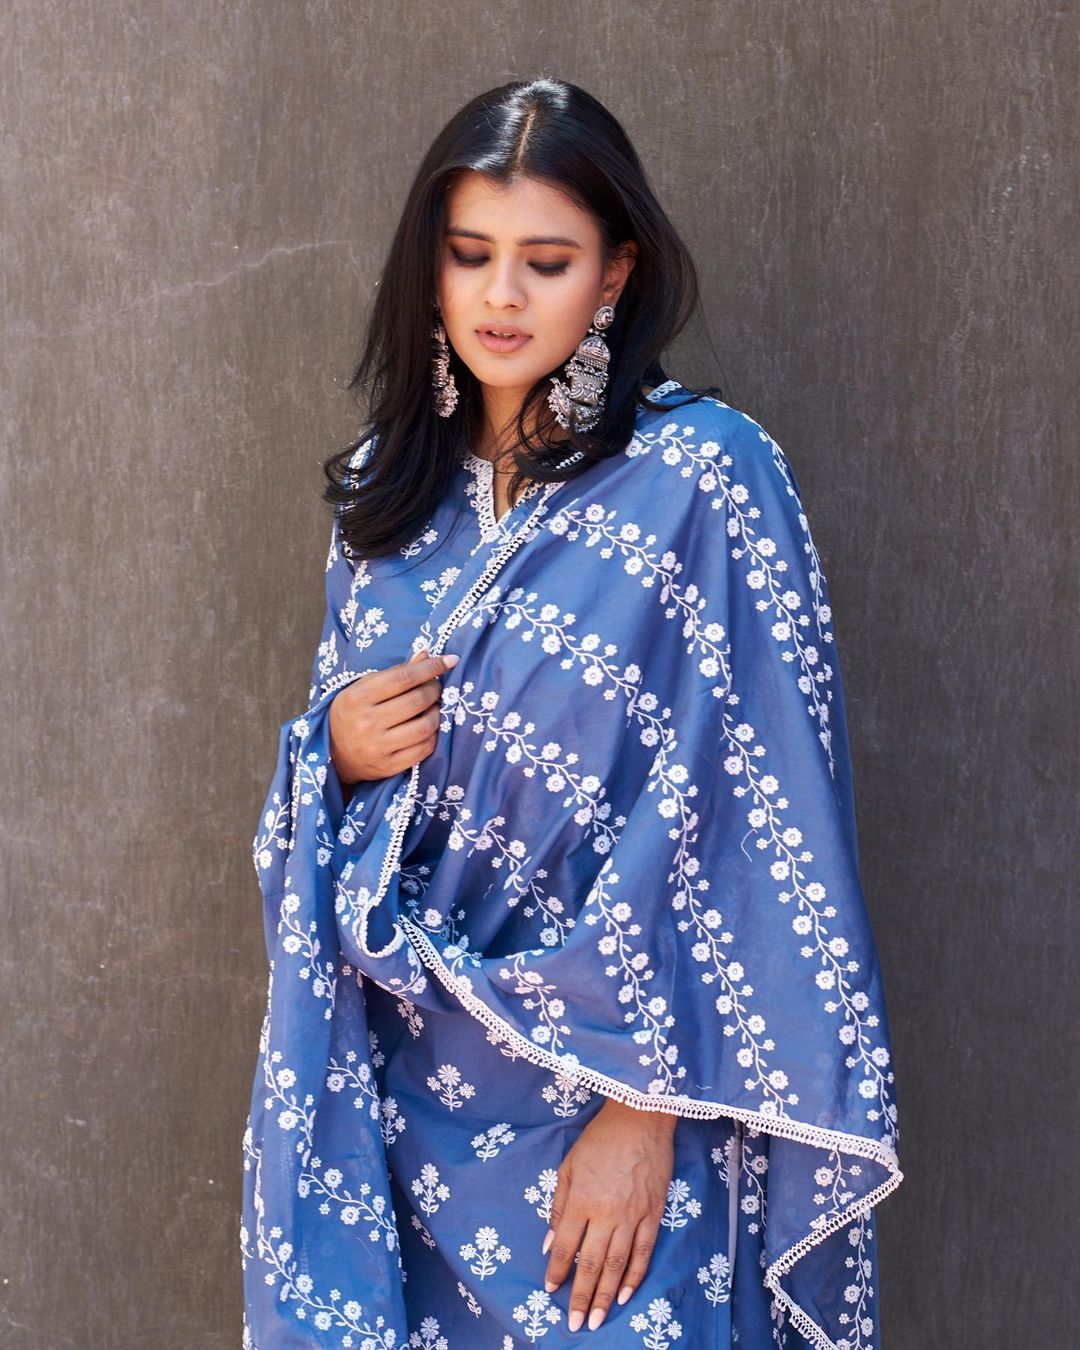 Actress hebah patel latest stylish and romantic clicks-Hebahpatel, Actresshebah, Hebah Patel Photos,Spicy Hot Pics,Images,High Resolution WallPapers Download